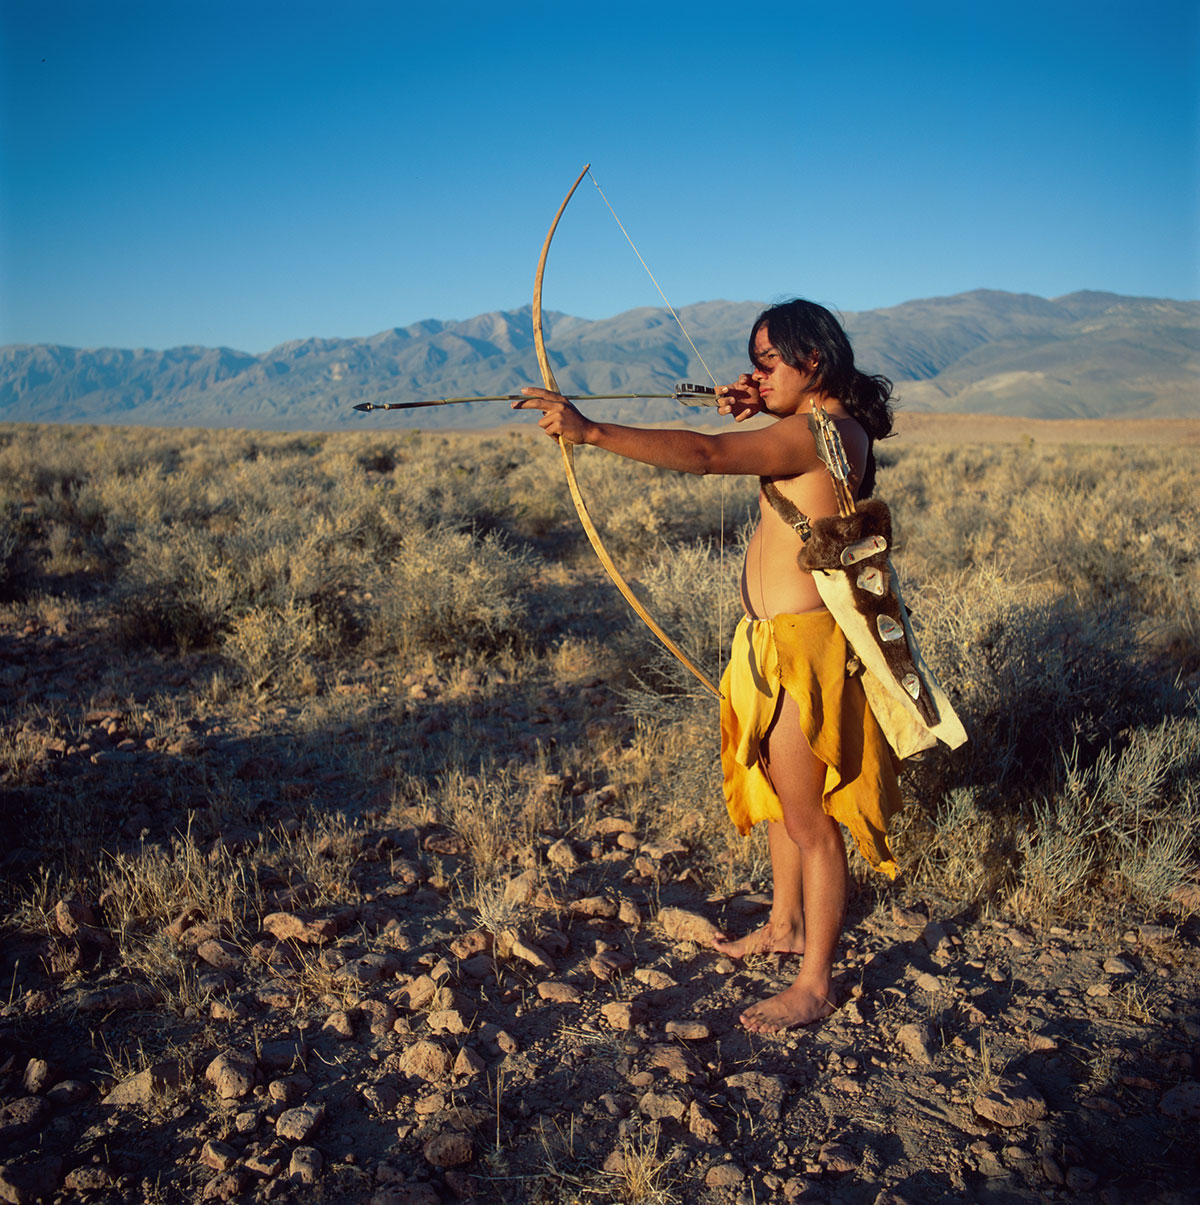 Native Americans - Paiute - Shoshone -man with bow and arrow